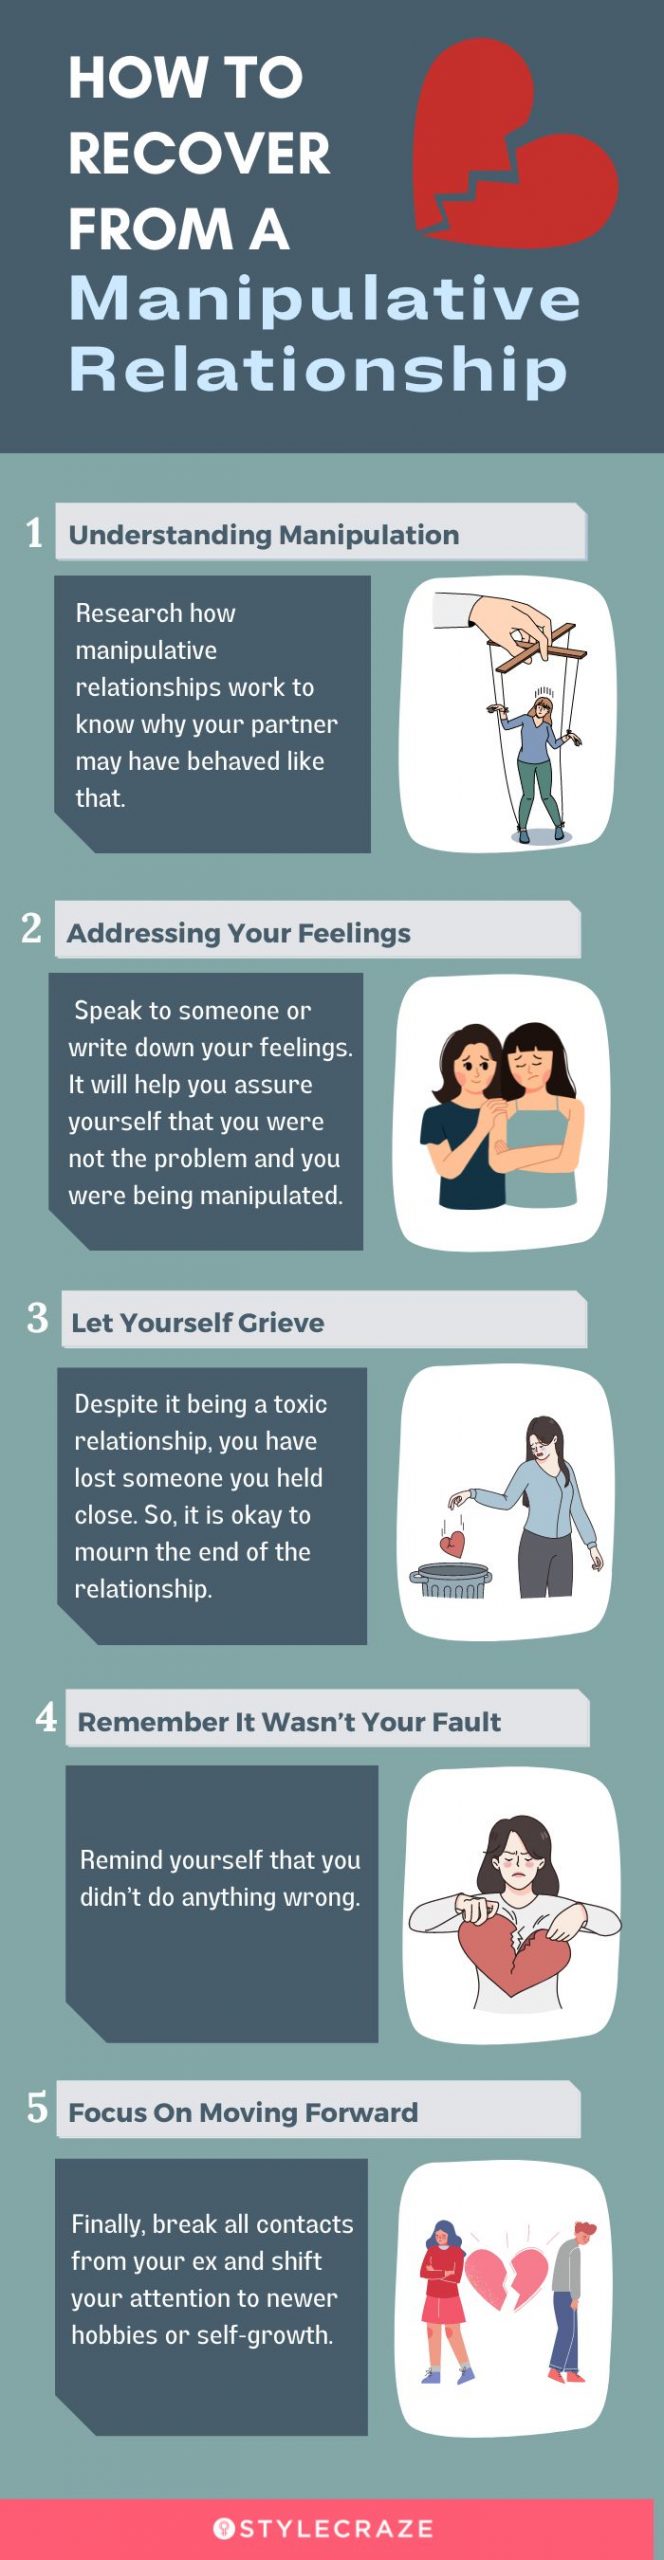 how to recover from a manipulative relationship (infographic)